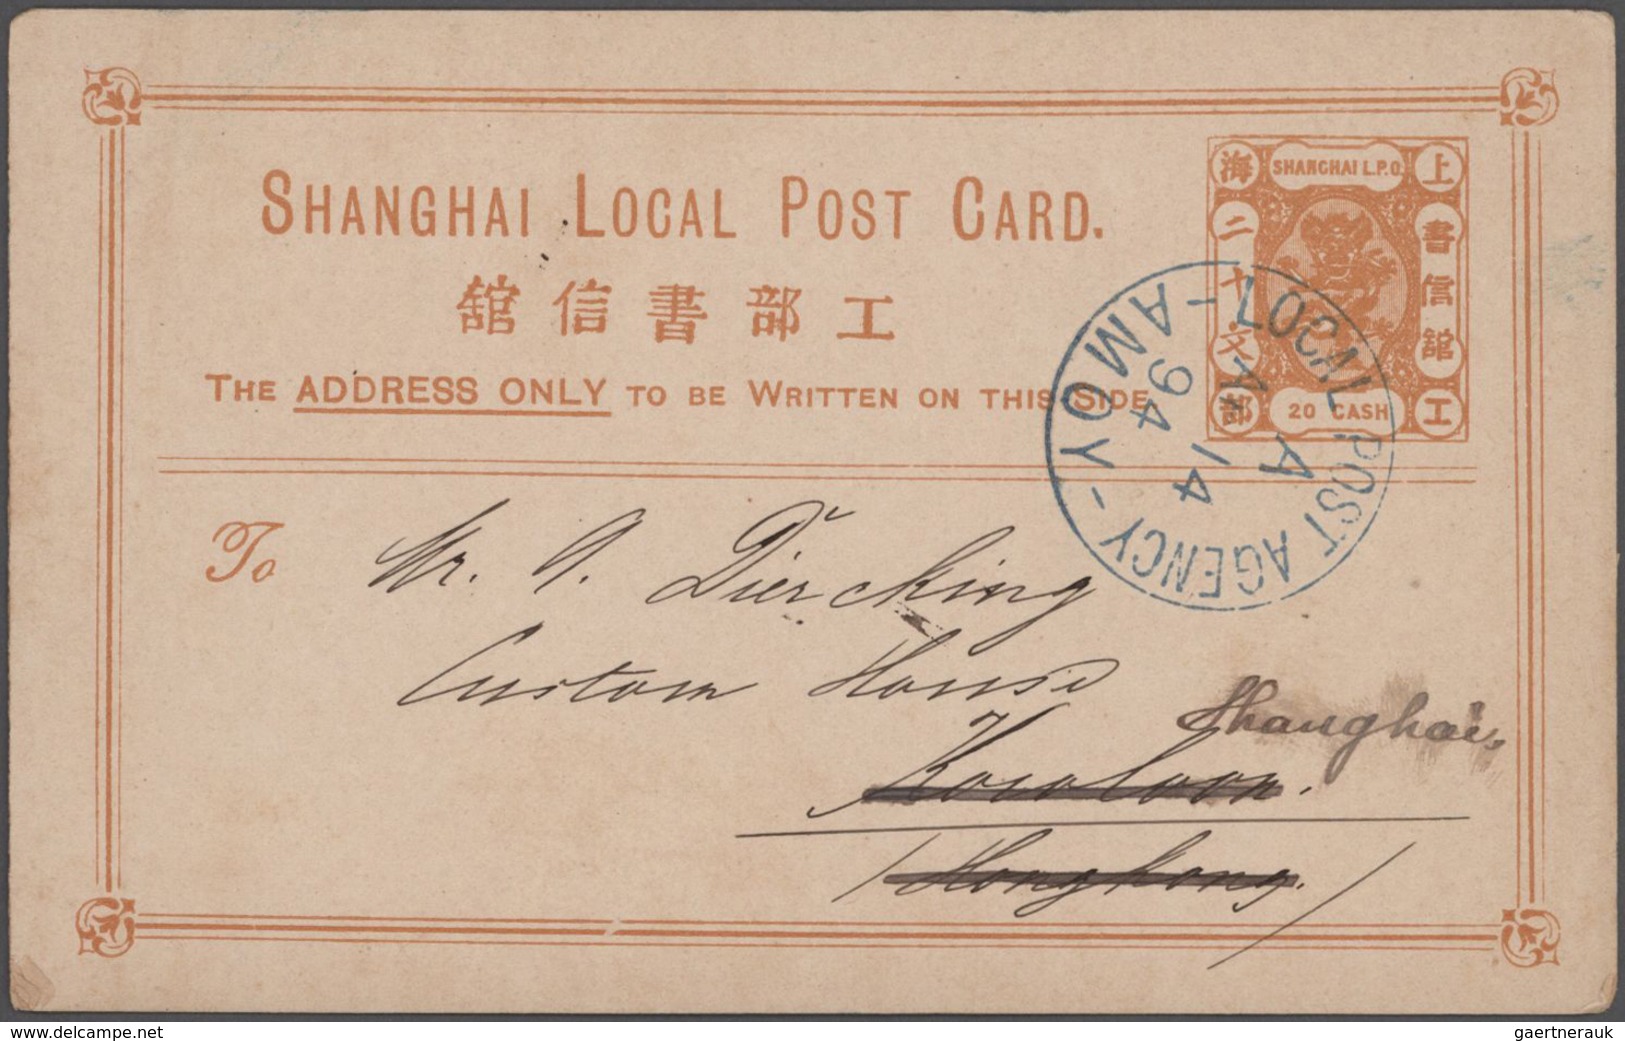 China: 1898/1940, lot covers/stationery mint/used inc. 1894 LOCAL POST AMOY blue pmk., registration